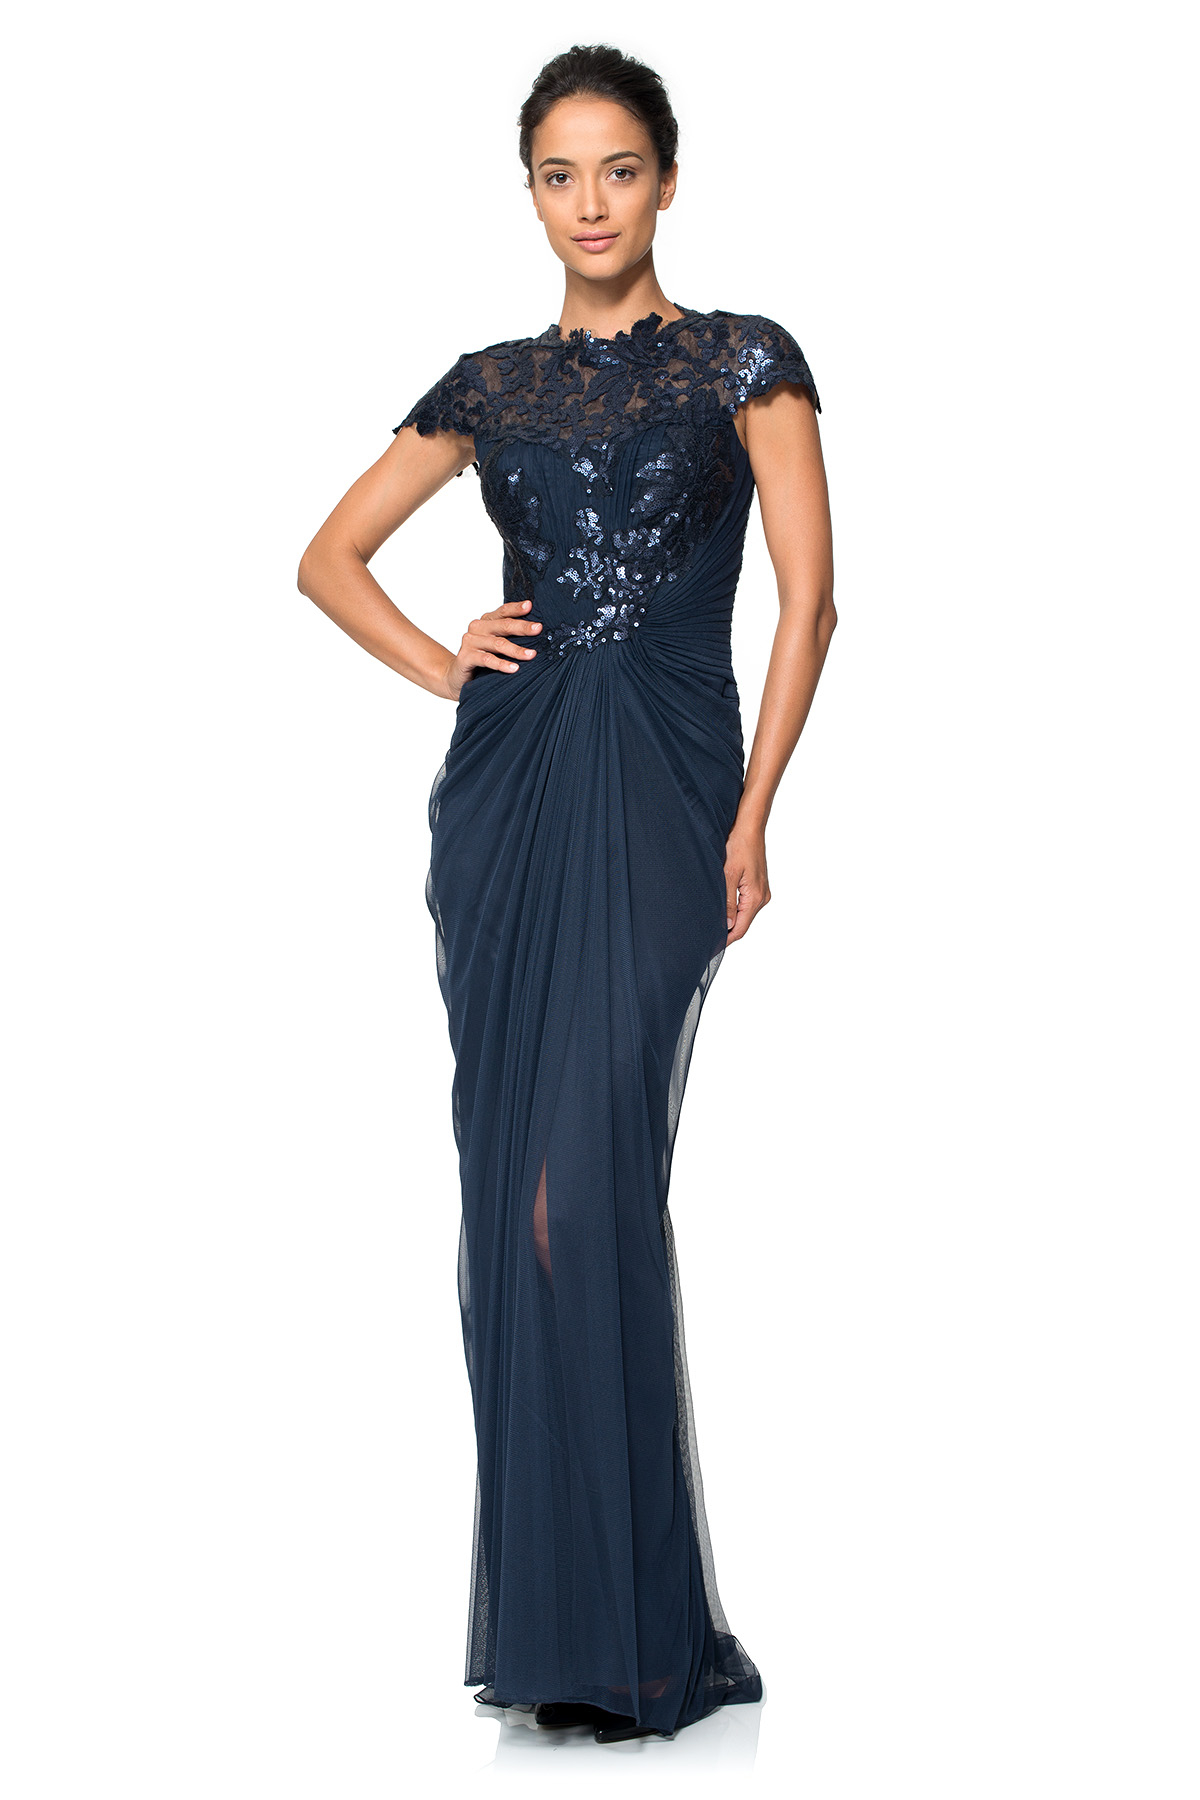 Tadashi Shoji - Paillette Lace and Tulle Gown in Navy